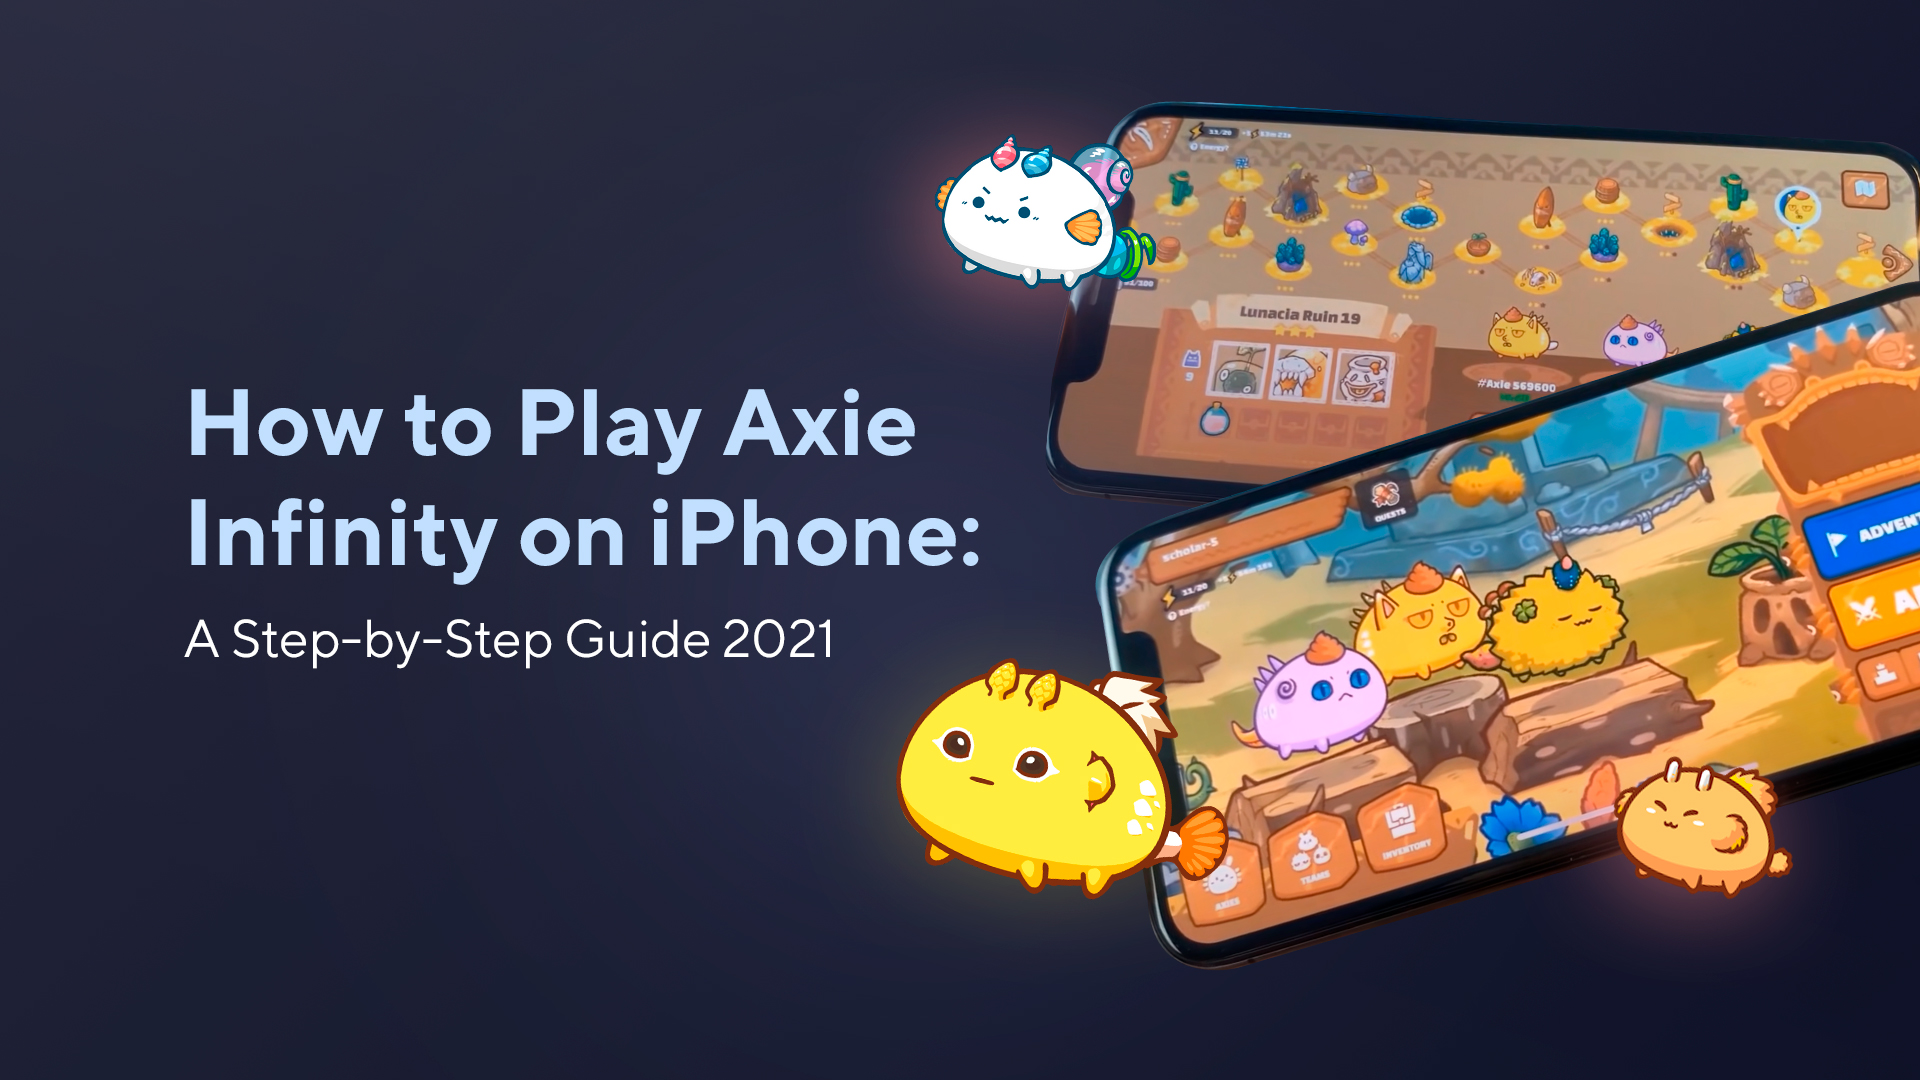 How to Play Axie Infinity on iPhone: A Step-by-Step Guide 2022